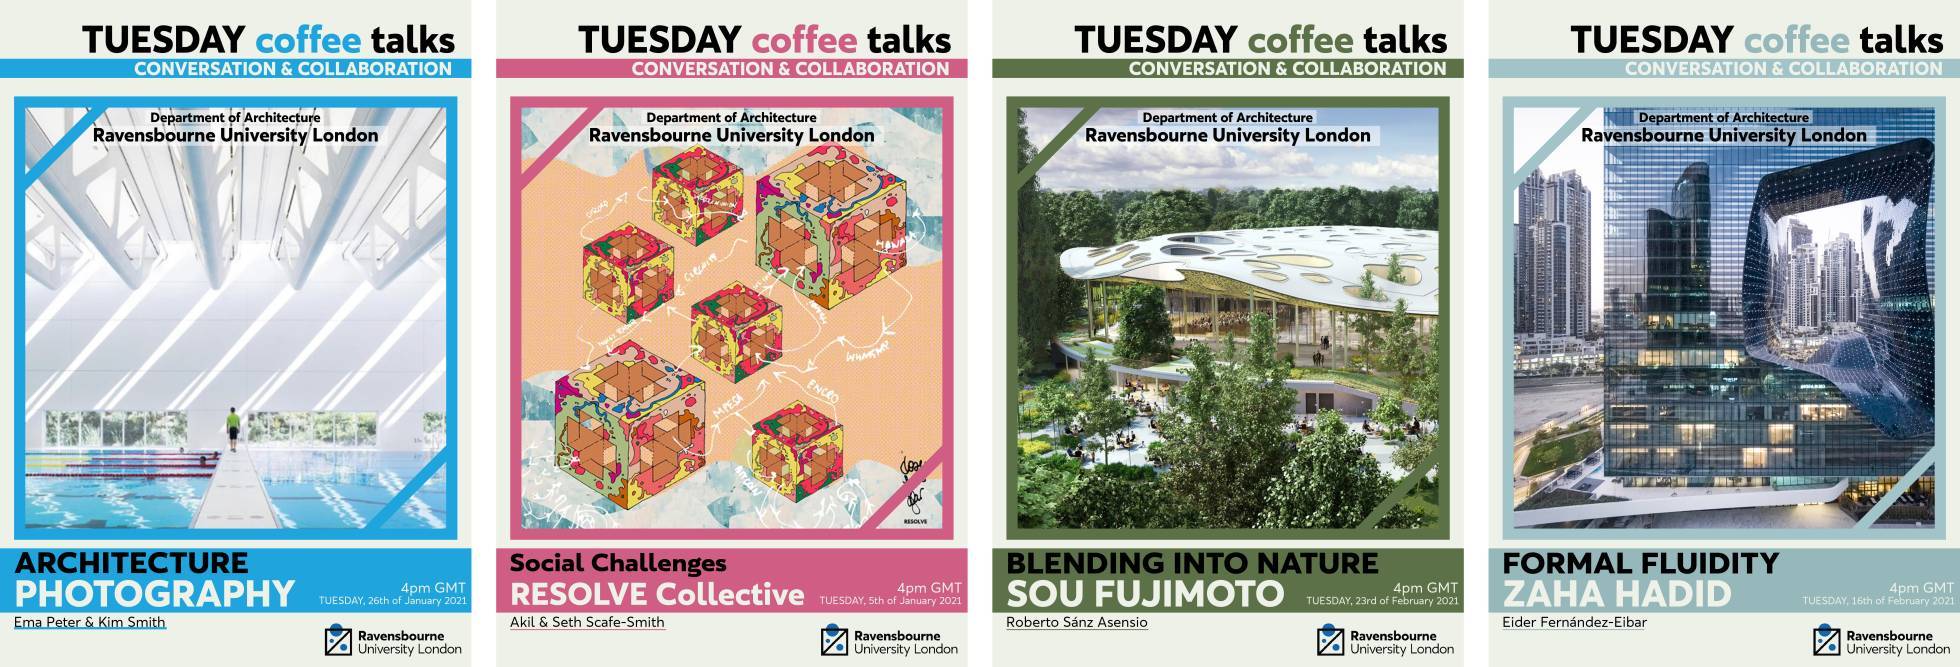 Architecture Tuesday Coffee Talks posters